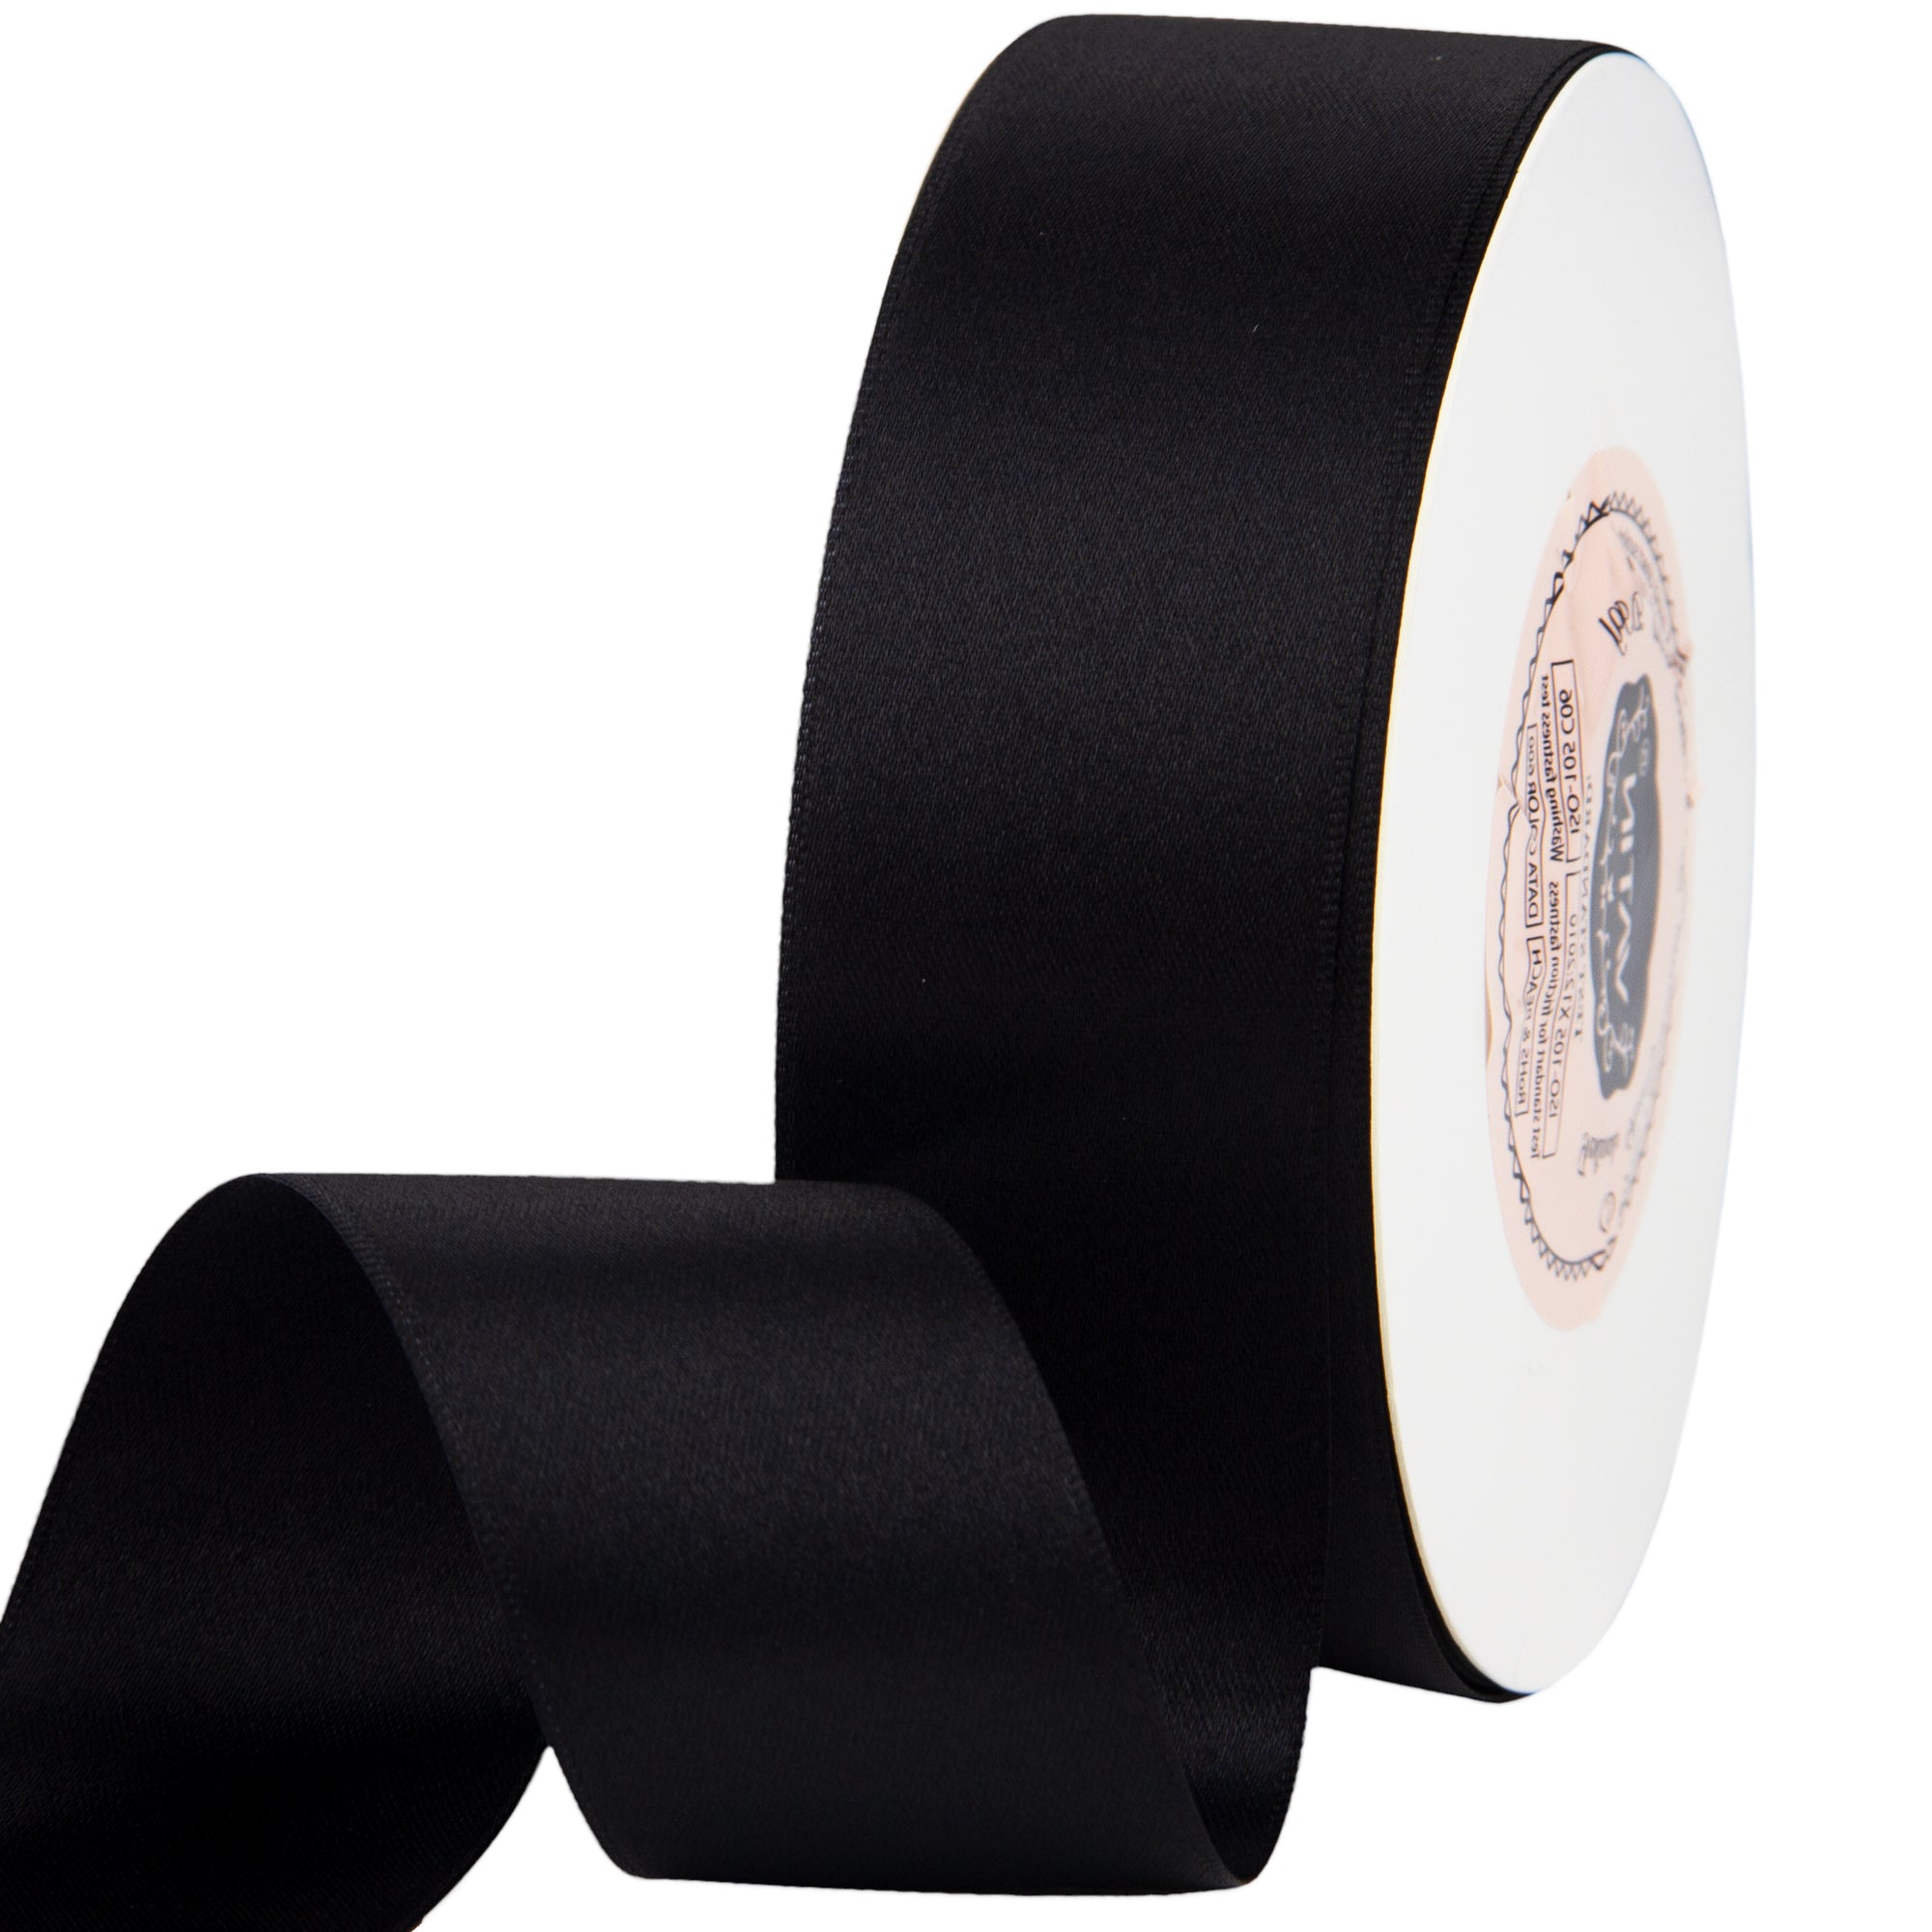  Stuffvisor Satin Black Ribbon - 1 inch x 50 Yards, Double Face  Solid Color Ribbon Roll, 100% Polyester Ribbon for Gift Wrapping, Crafts,  Hair and Multiple Decorations : Office Products